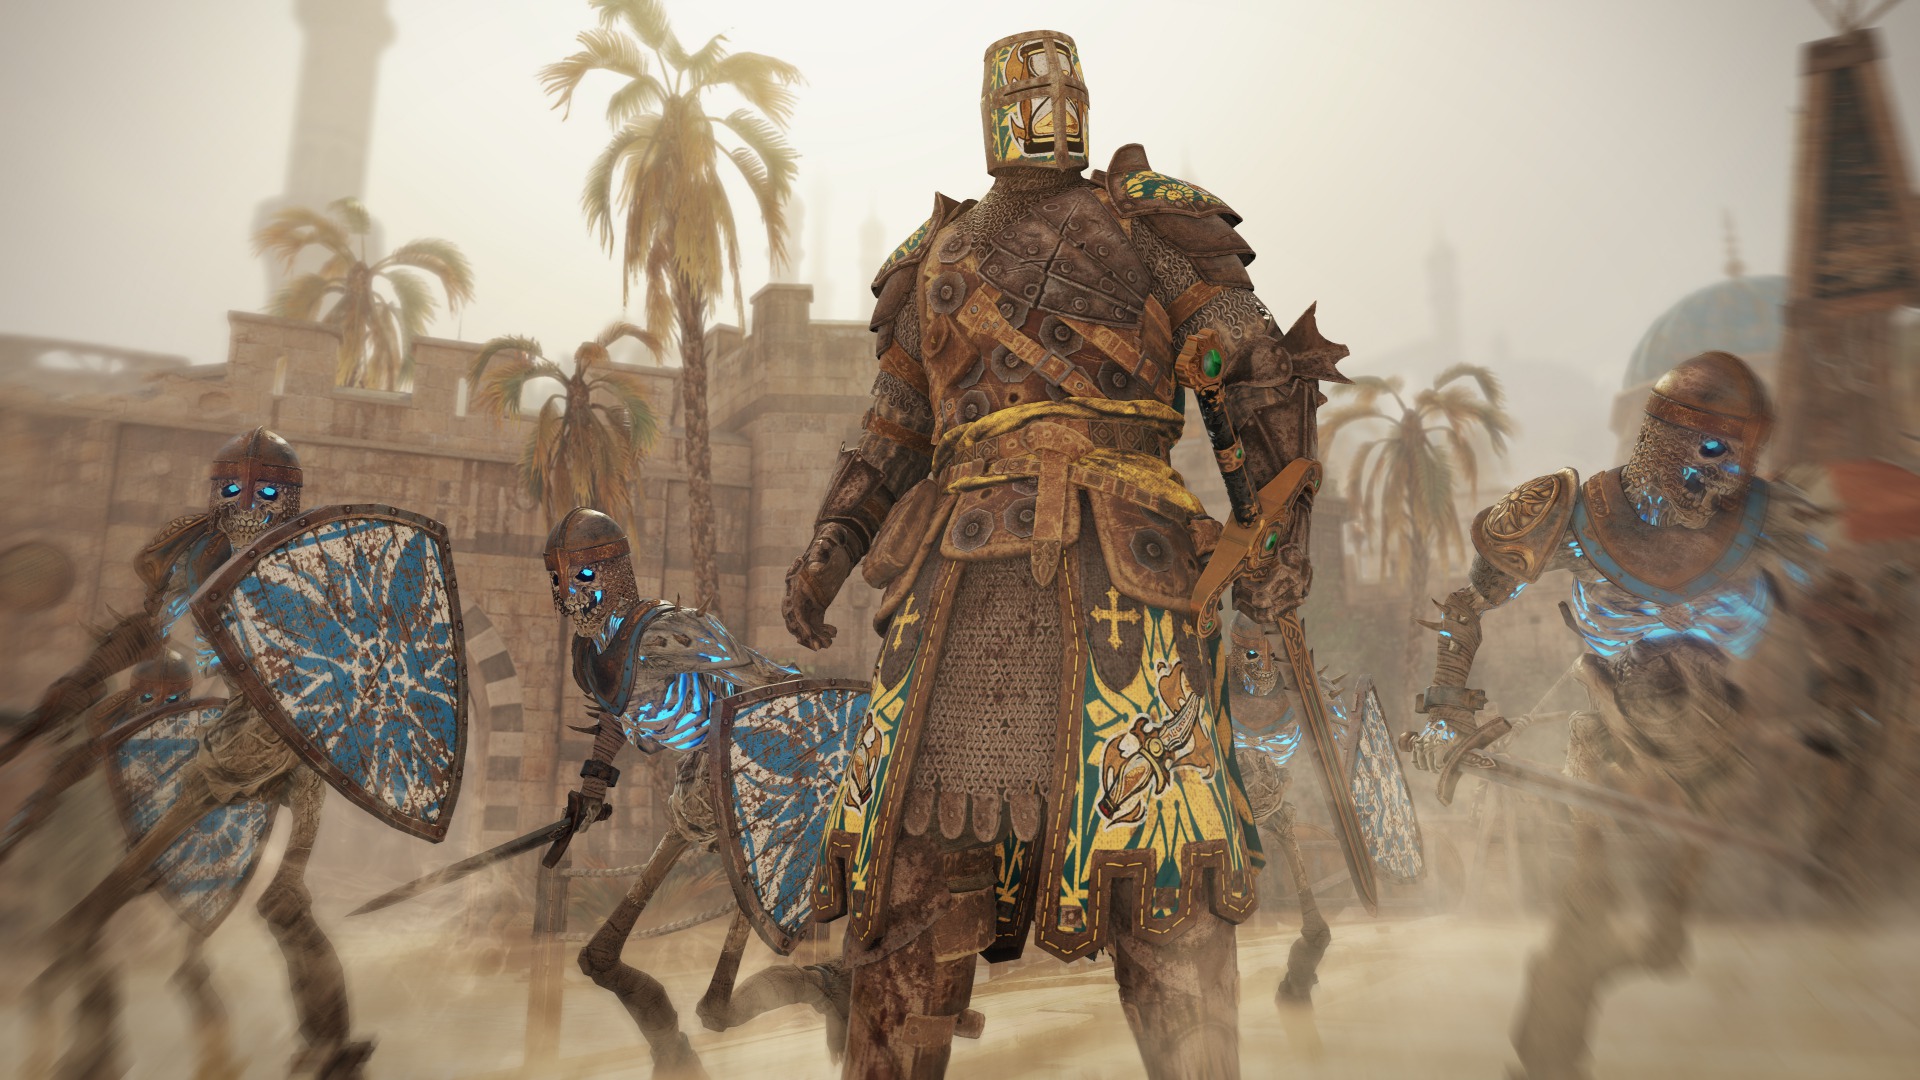 Blades of Persia knight